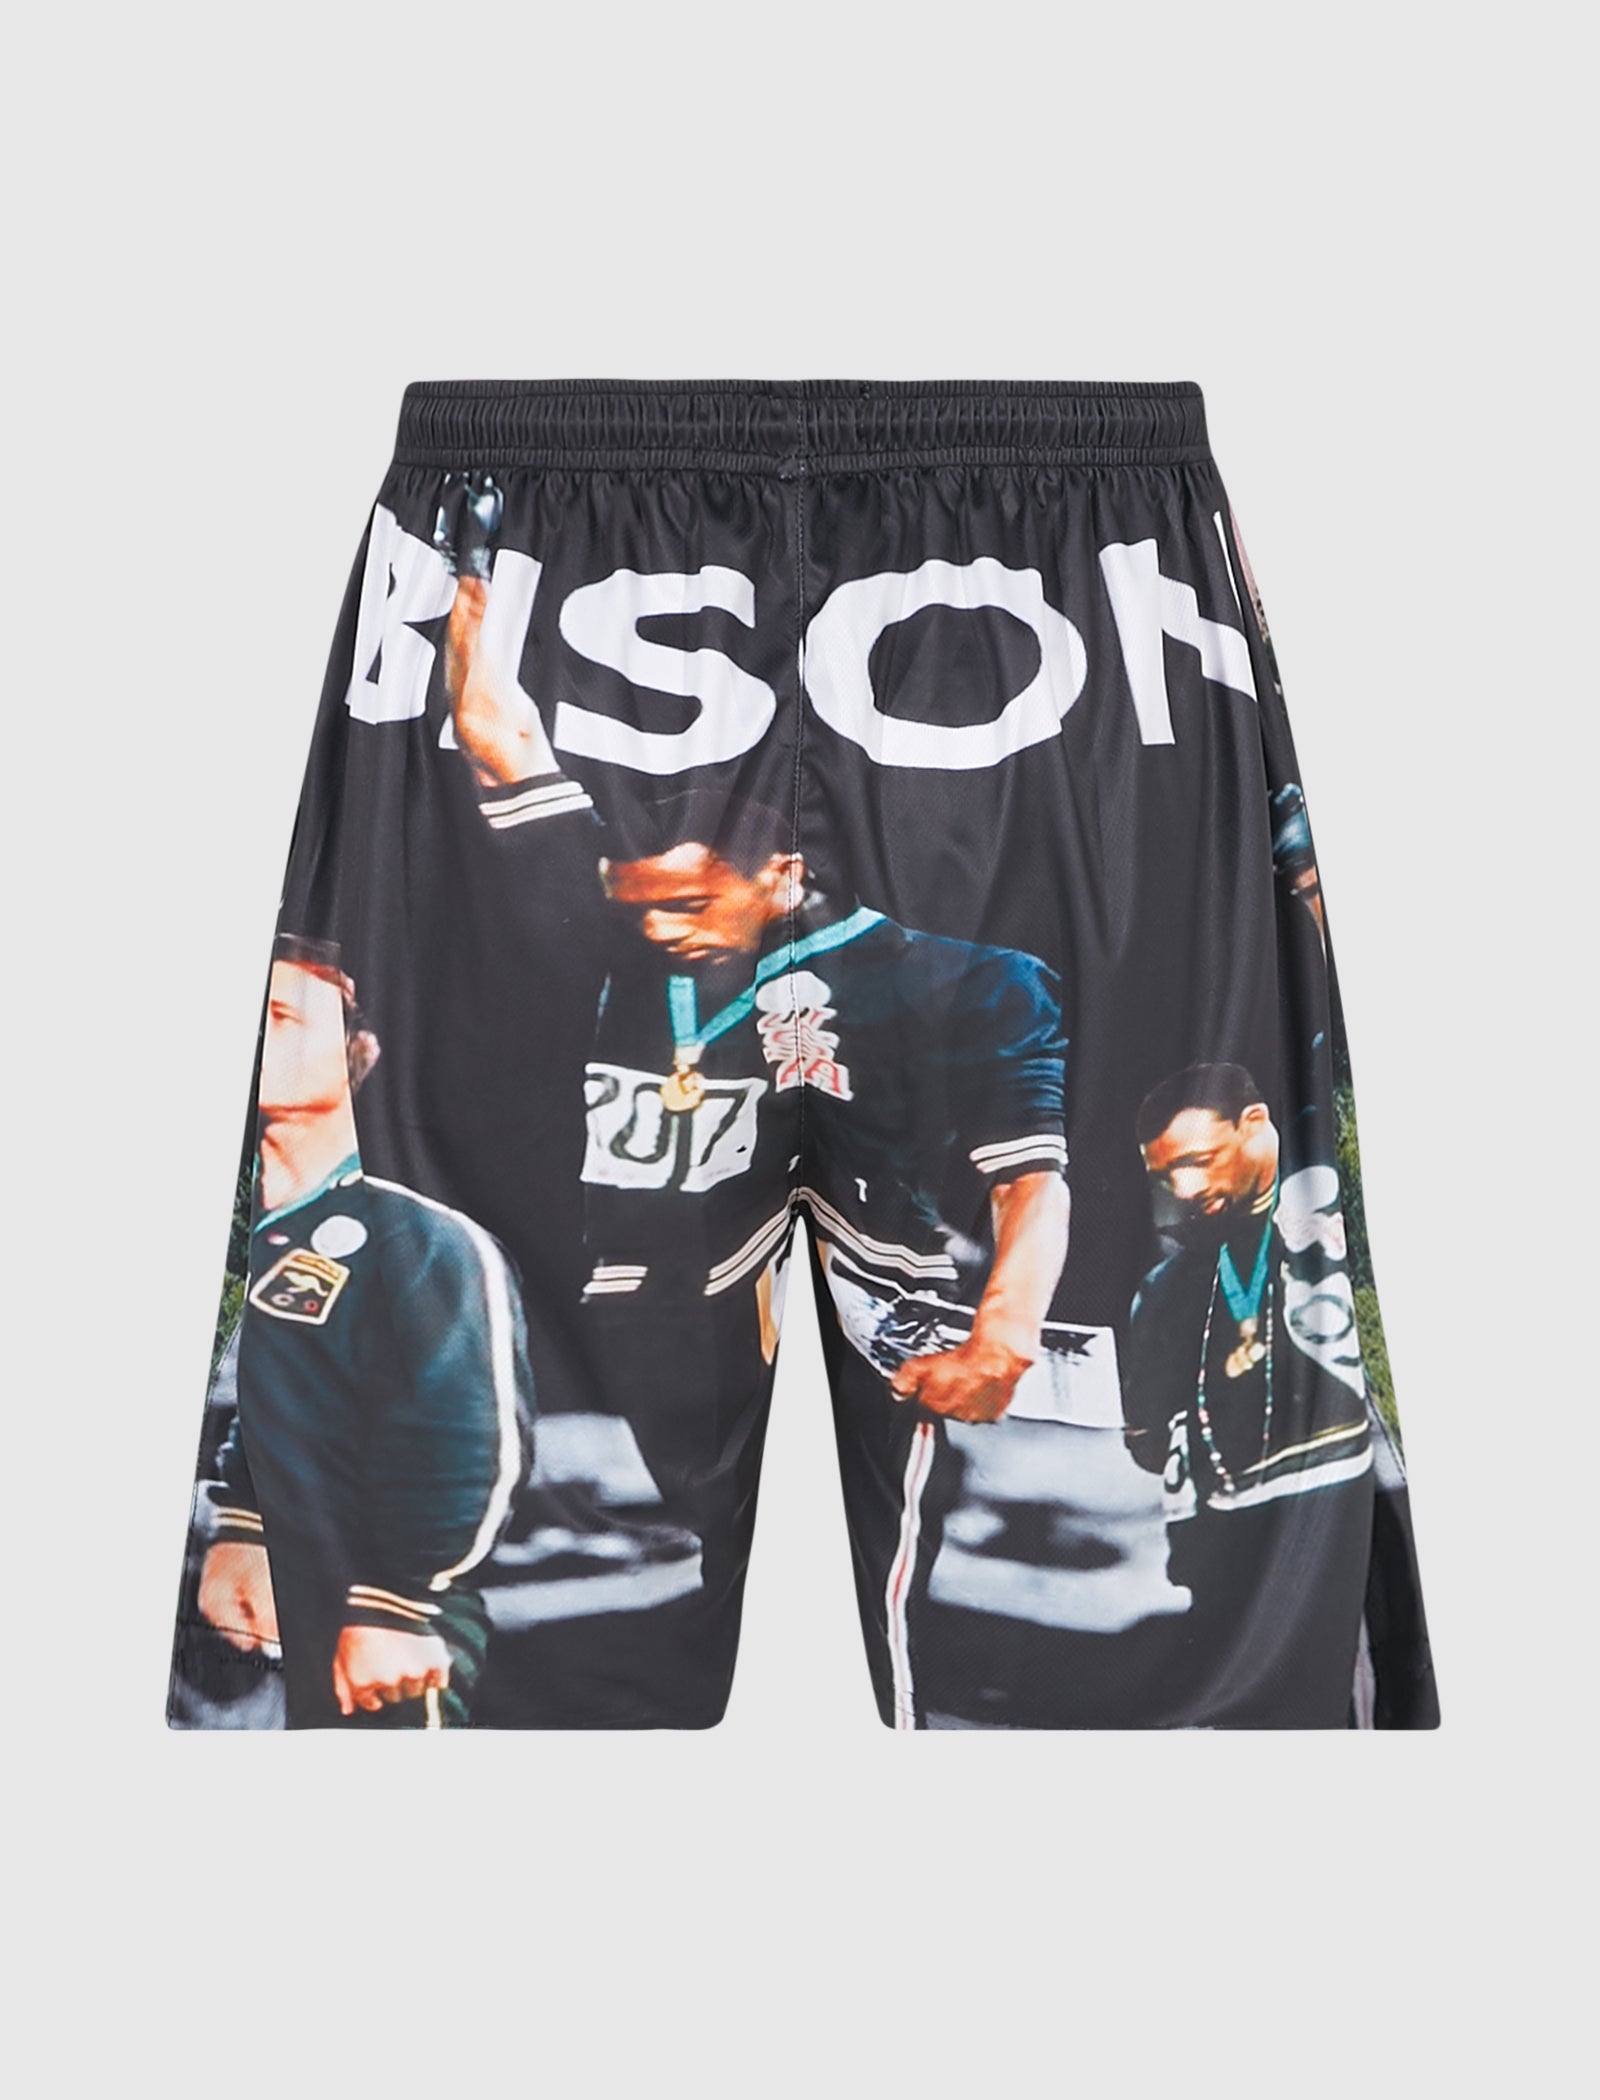 HEARD OF BISON 1968 OLYMPIC SHORTS